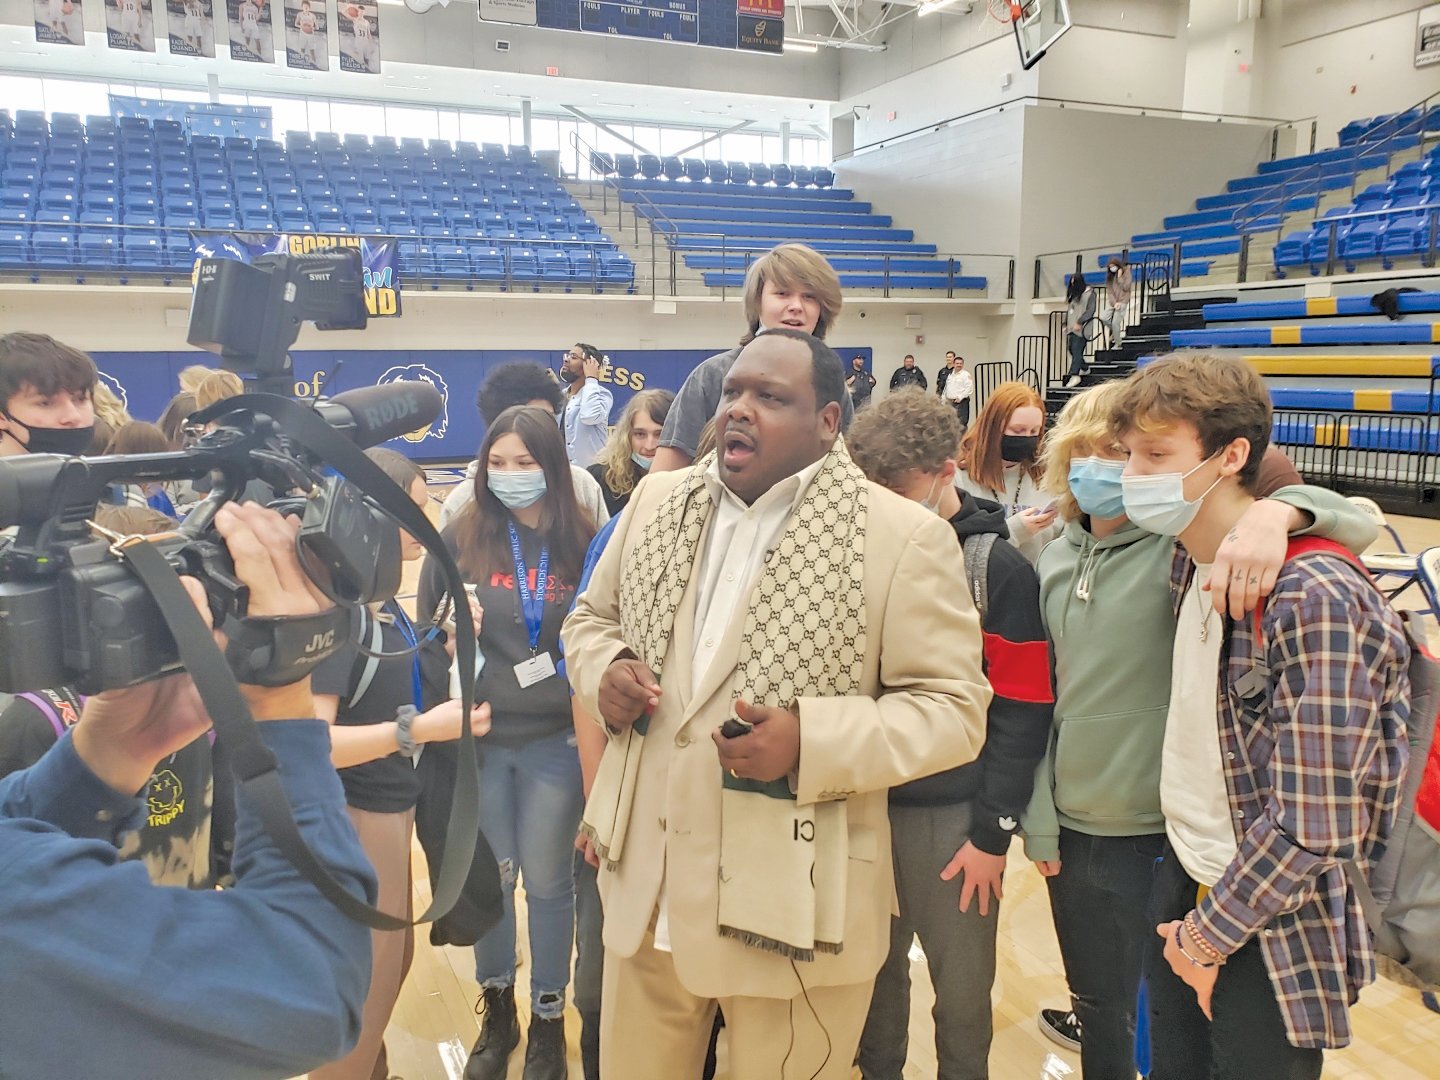 DuShun Scarbrough, executive director of the Arkansas Martin Luther King, Jr. Commission, was surrounded by students as he answered question after the MLK Birthday Bash on Friday.